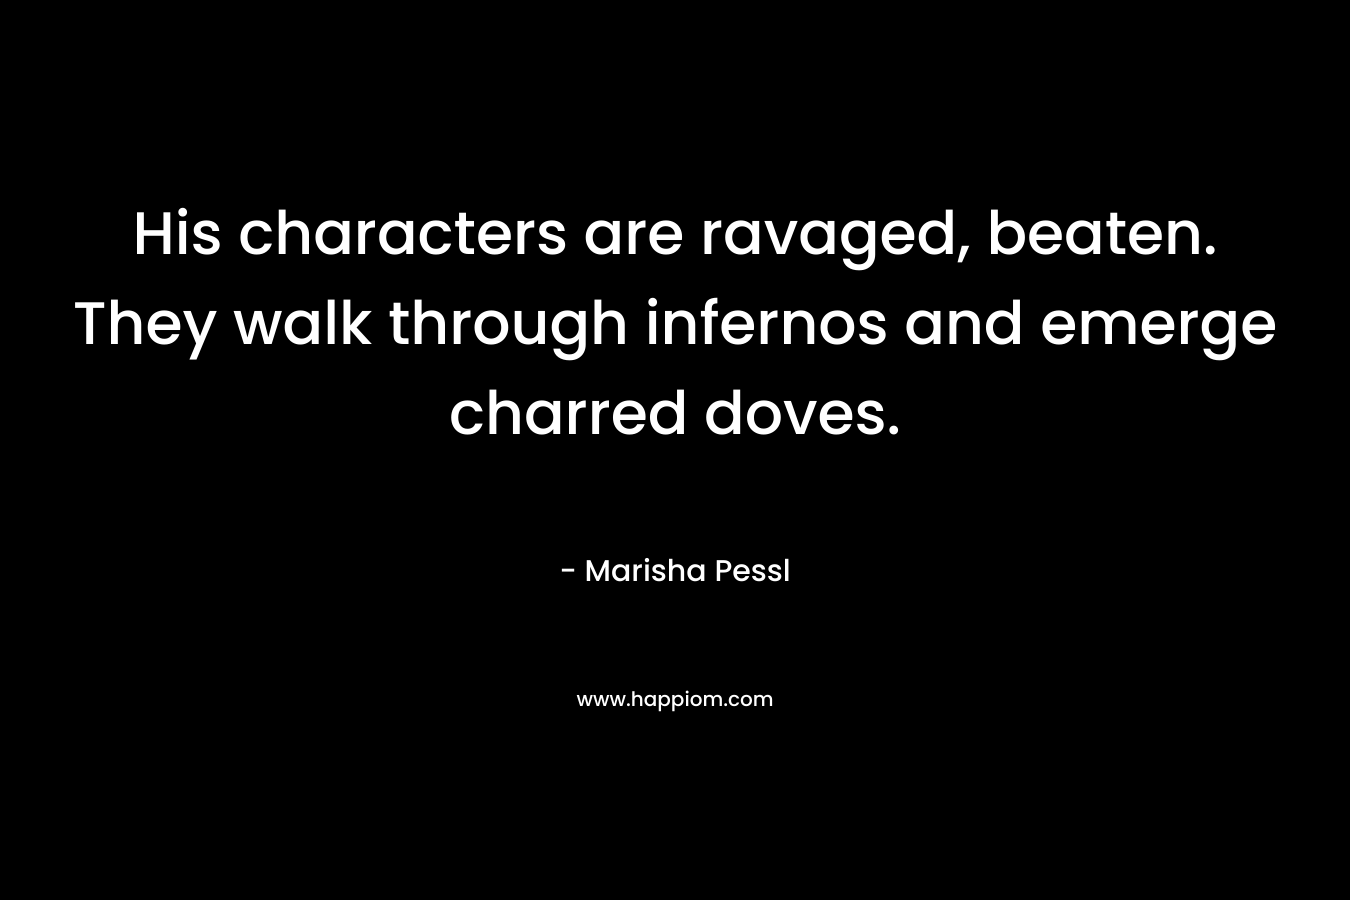 His characters are ravaged, beaten. They walk through infernos and emerge charred doves. – Marisha Pessl